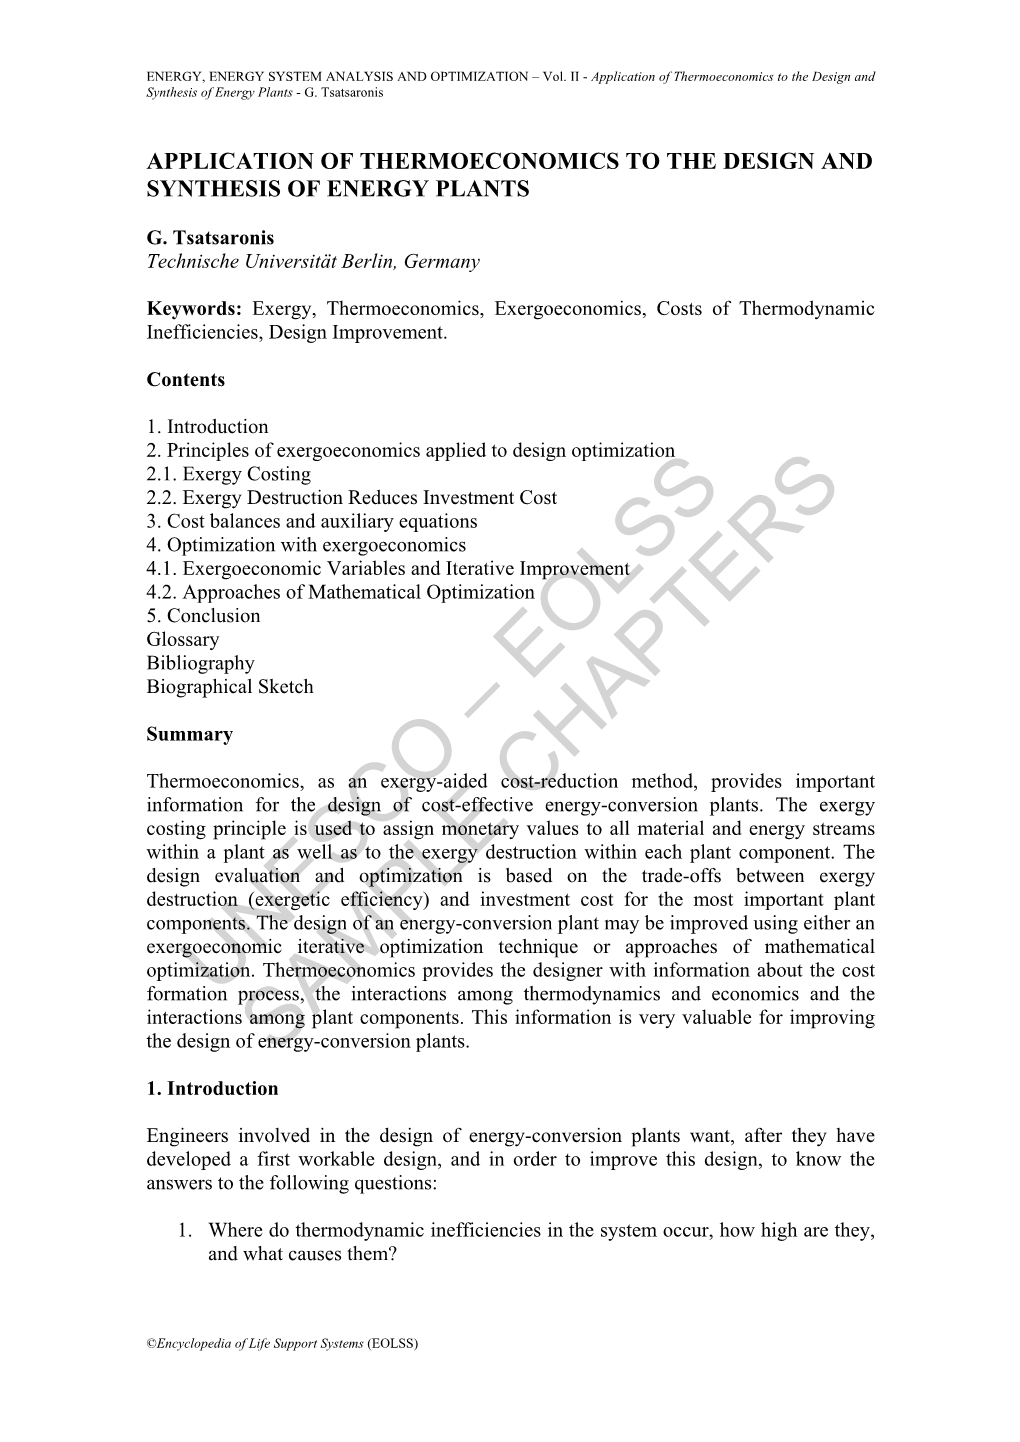 Application of Thermoeconomics to the Design and Synthesis of Energy Plants - G